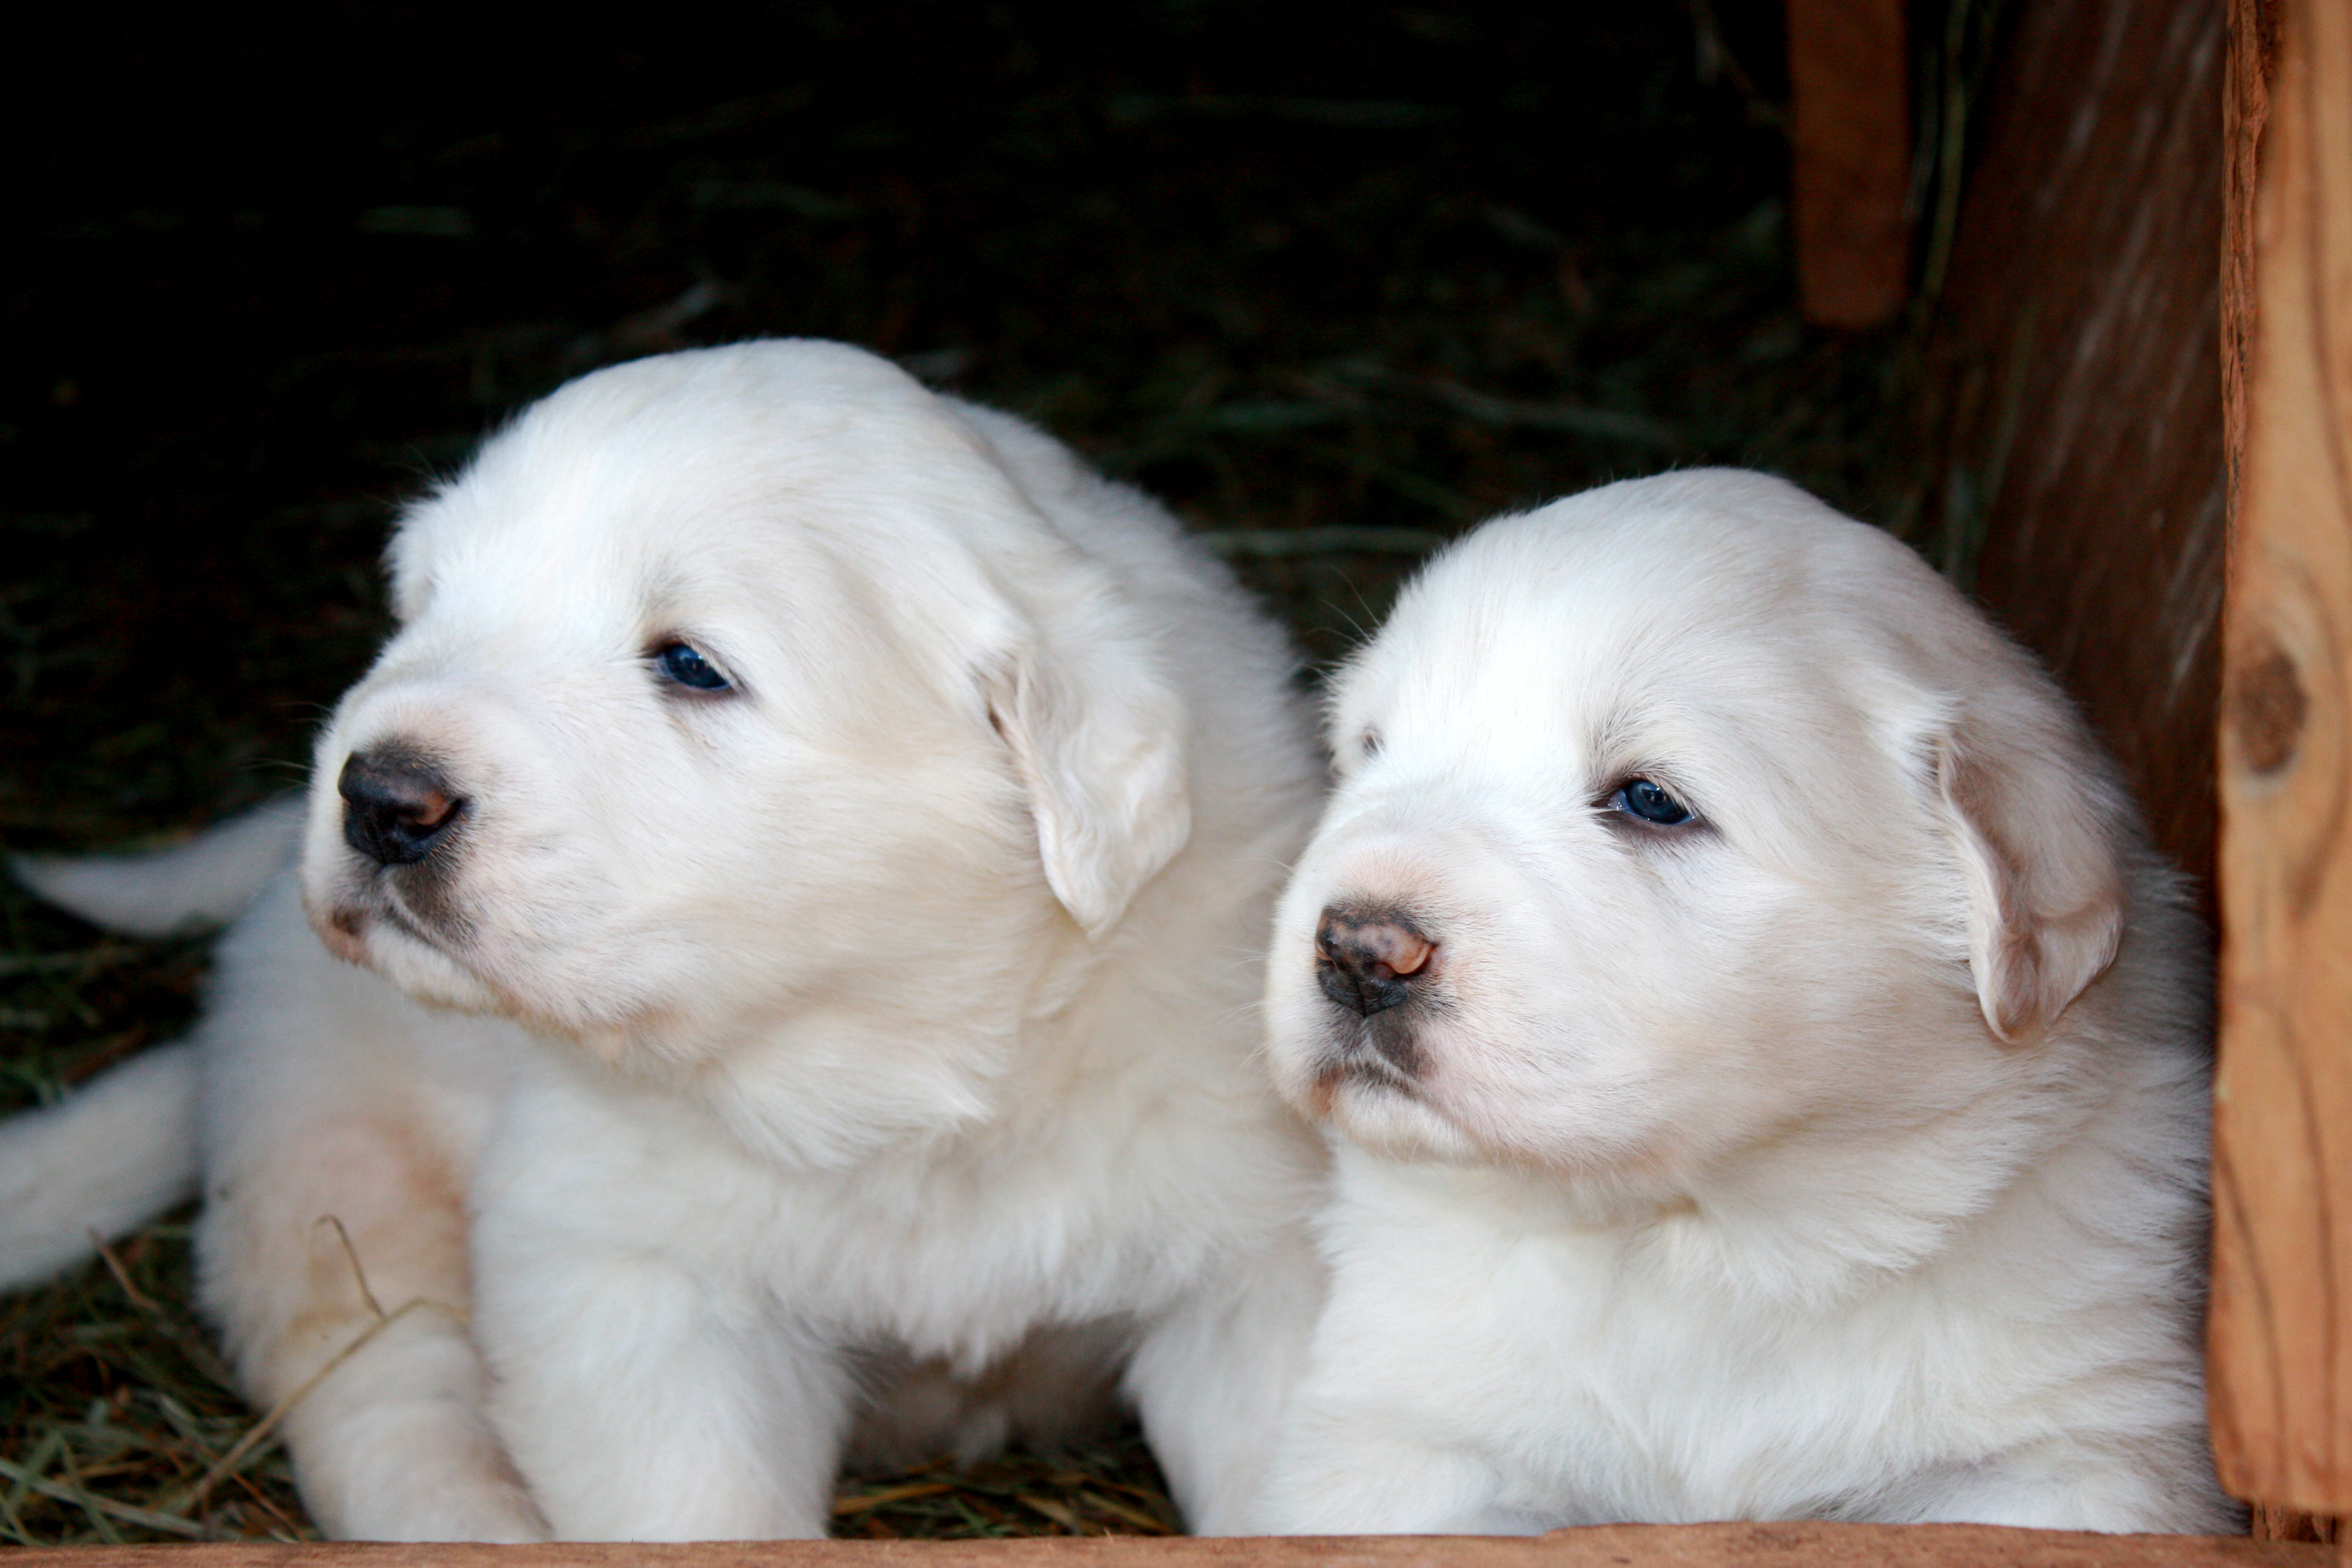 Two Great Pyrenees puppies wallpapers and images 